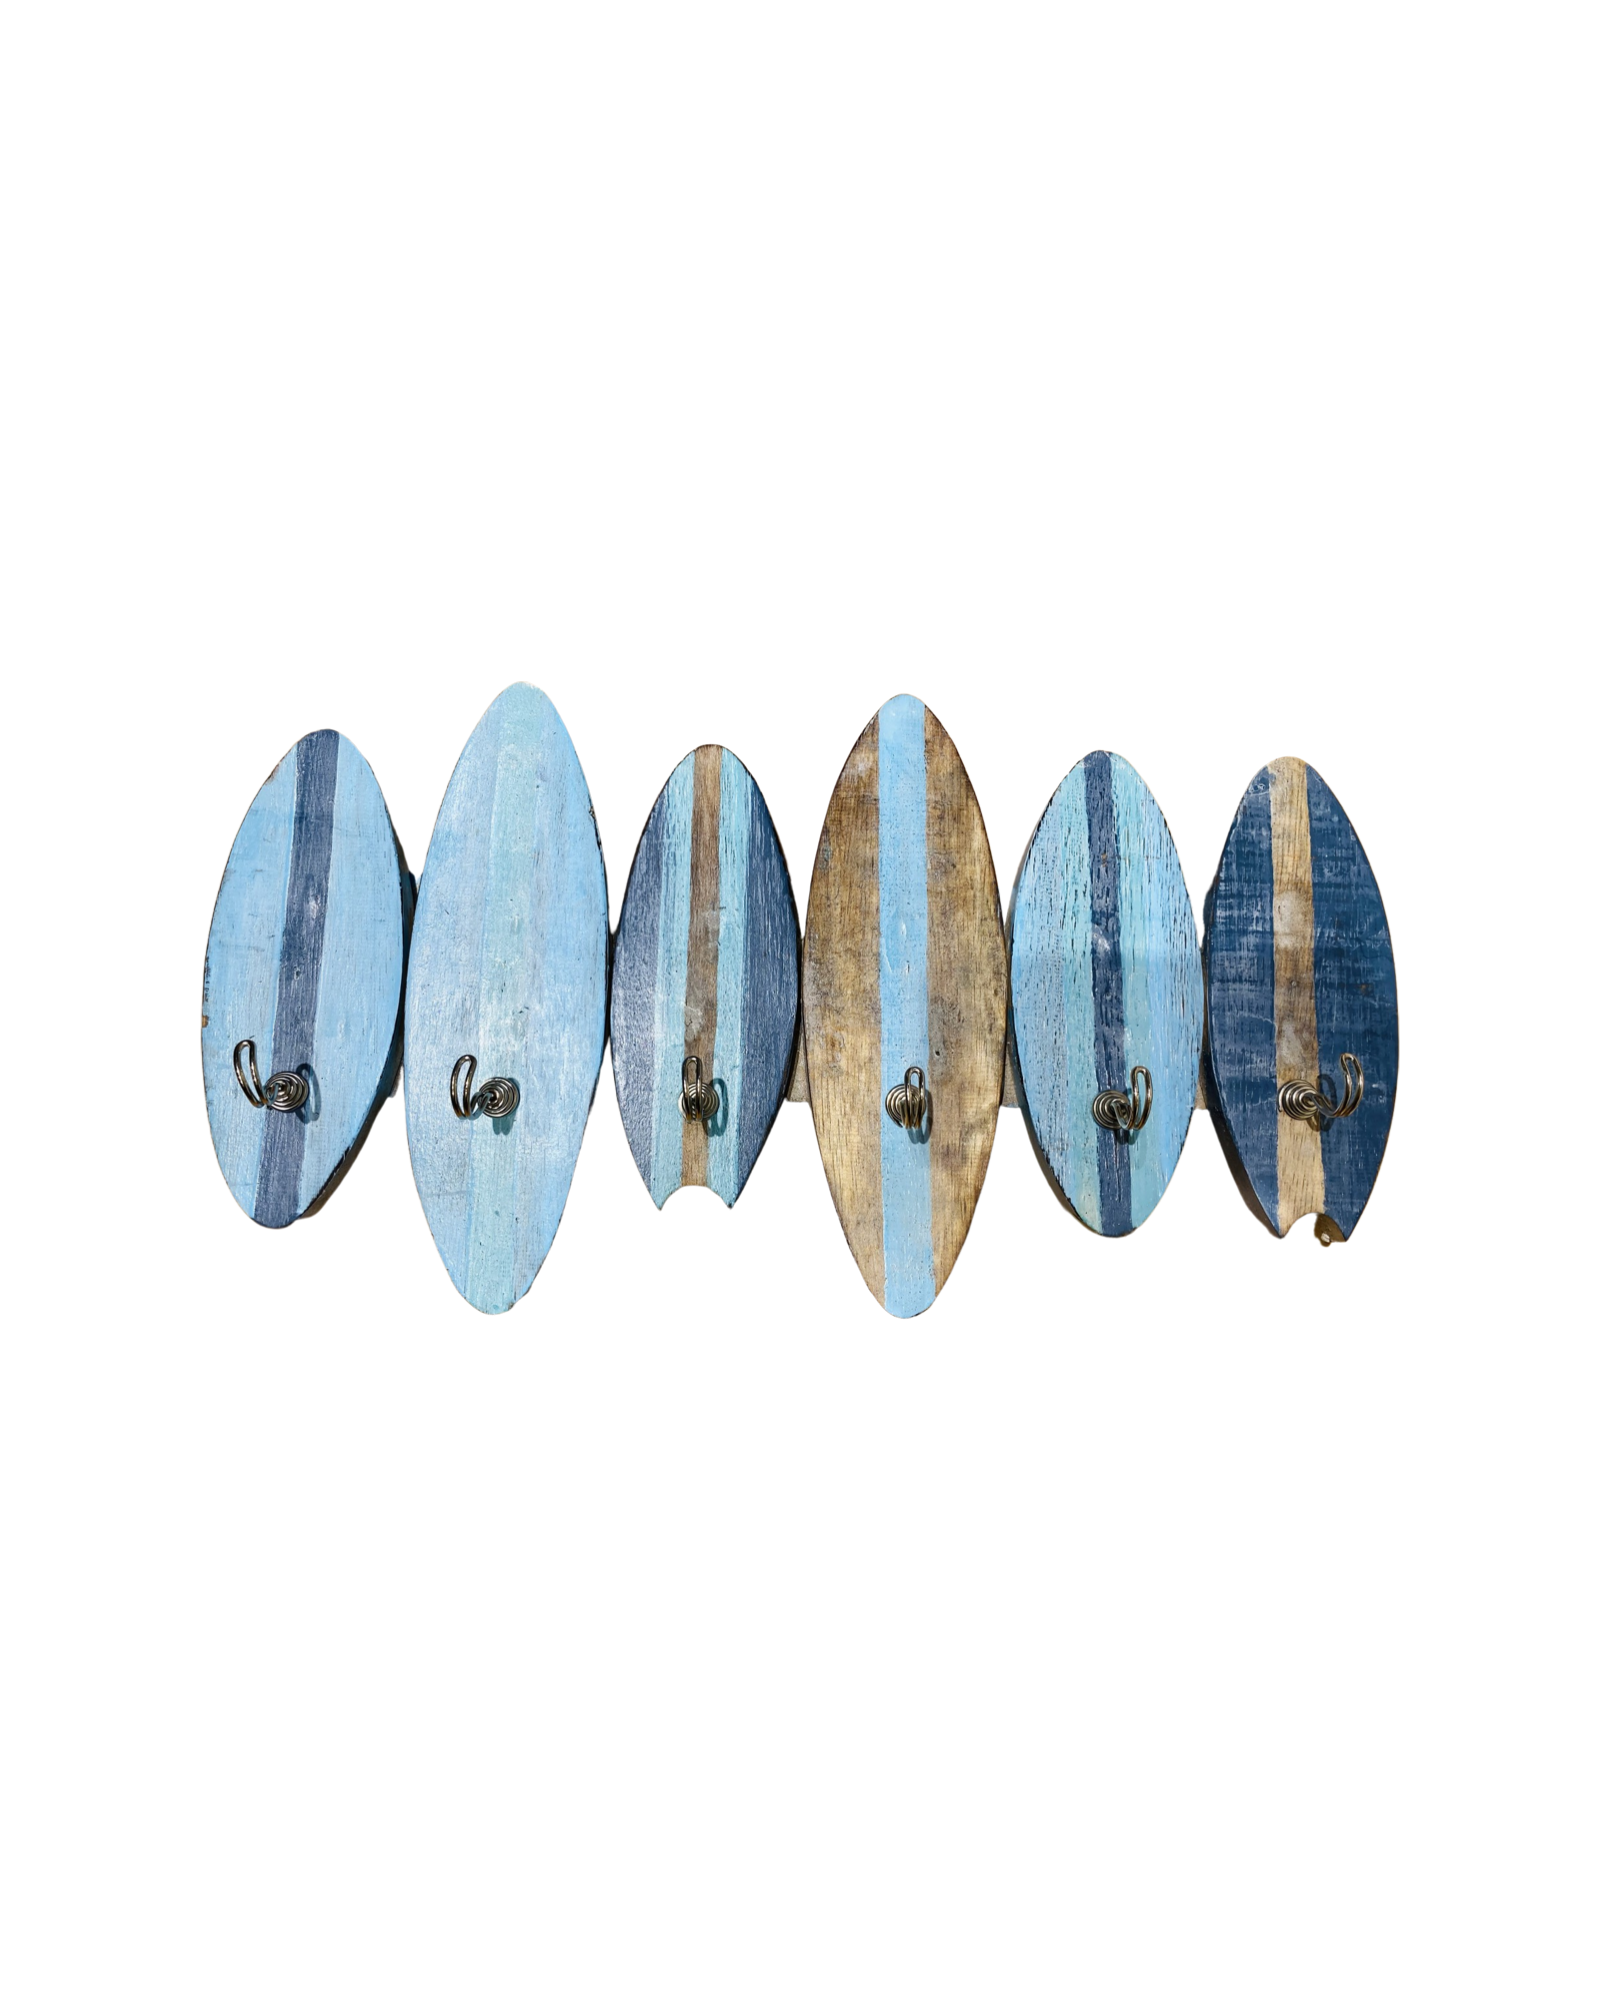 A wall art hanger with six carved surfboards in different shades on blue and six silver hangers to hold various items. 